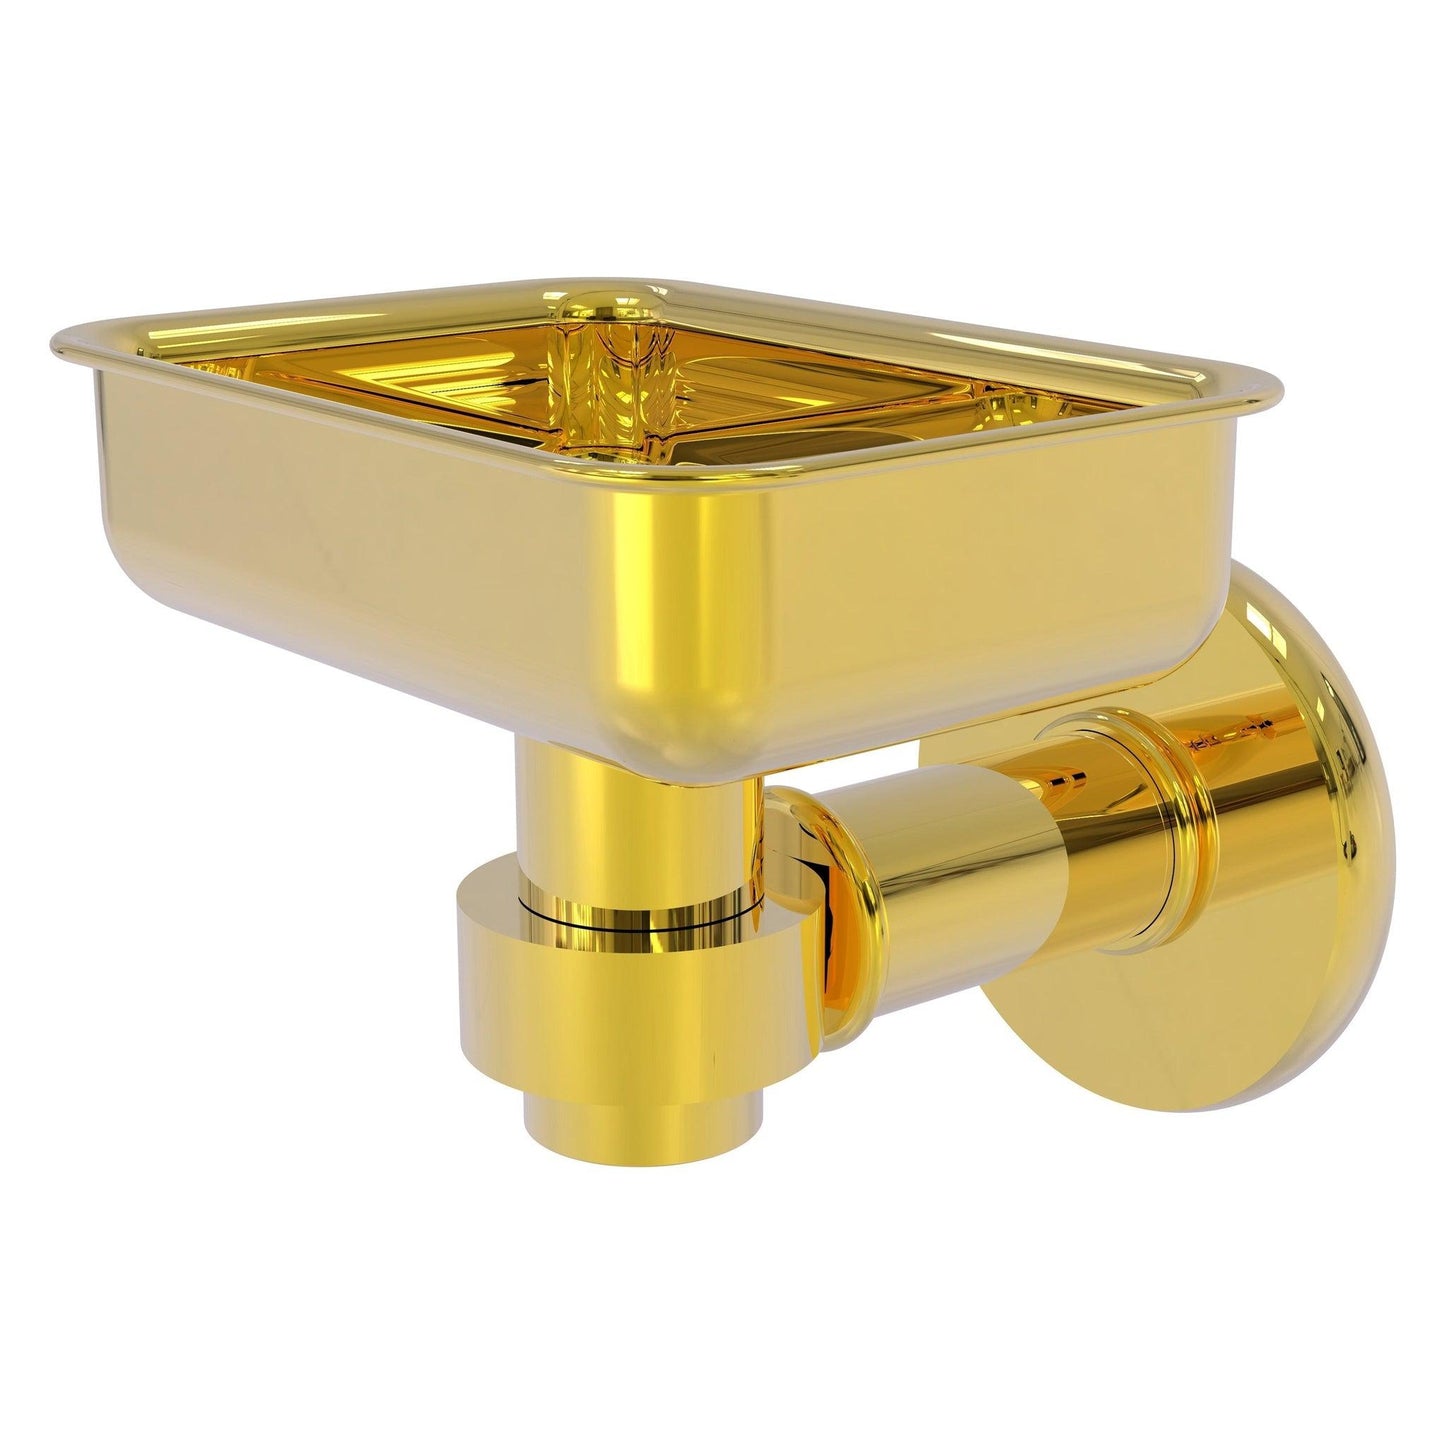 Allied Brass Continental 4.5" x 3.5" Polished Brass Solid Brass Wall-Mounted Soap Dish Holder